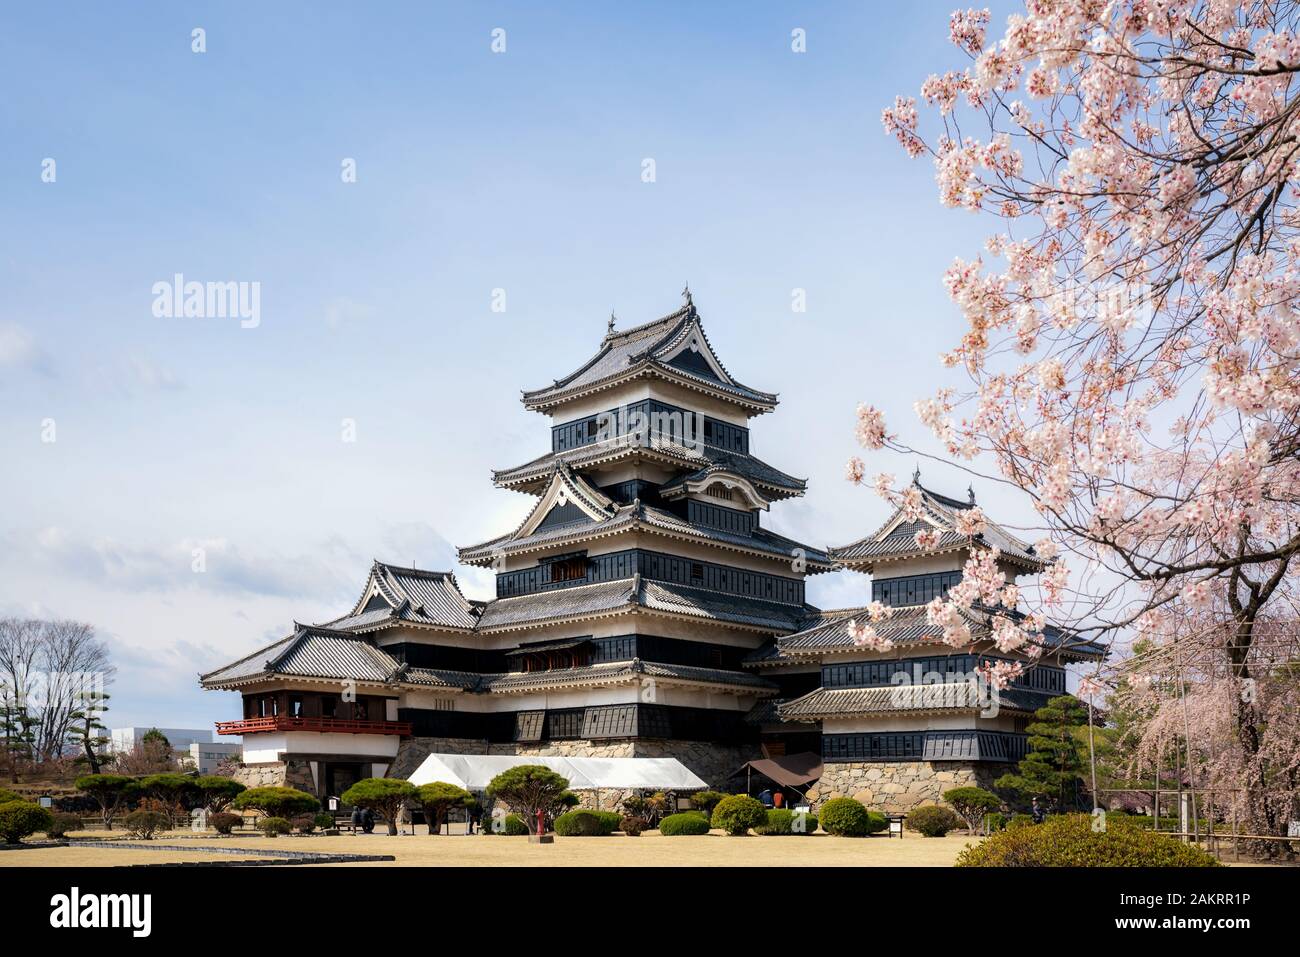 Matsumoto Castle during cherry blossom (Sakura) is one of the most famous sights in Matsumoto, Nagano, Japan. Japan tourism, history building, or trad Stock Photo